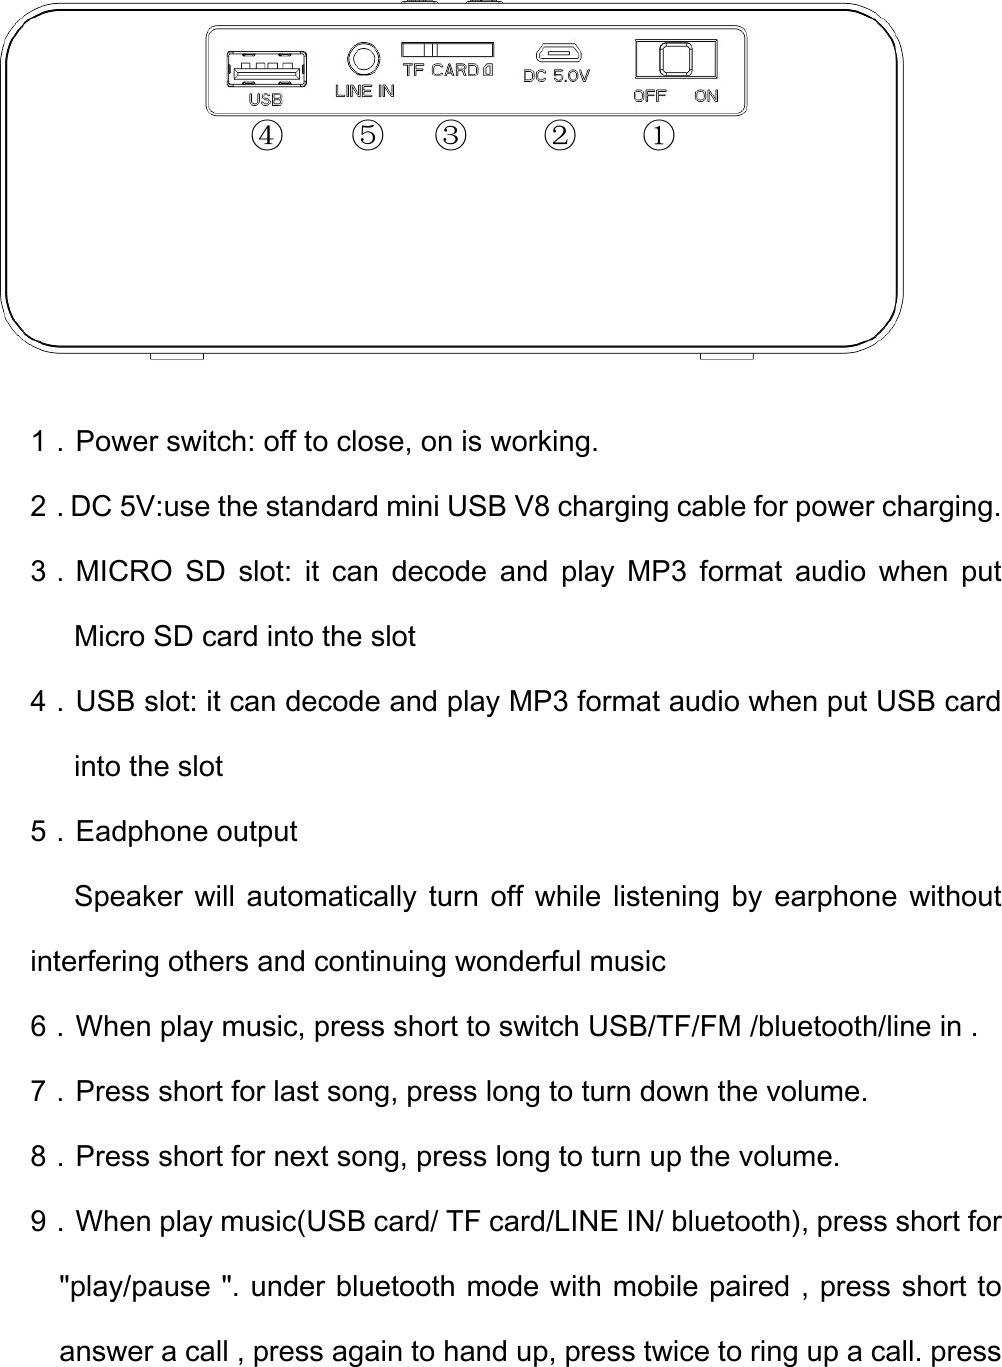 1．Power switch: off to close, on is working. 2．DC 5V:use the standard mini USB V8 charging cable for power charging. 3．MICRO  SD  slot:  it  can  decode  and  play  MP3  format  audio  when  put Micro SD card into the slot 4．USB slot: it can decode and play MP3 format audio when put USB card into the slot 5．Eadphone output       Speaker will automatically turn off while listening by earphone without interfering others and continuing wonderful music 6．When play music, press short to switch USB/TF/FM /bluetooth/line in . 7．Press short for last song, press long to turn down the volume. 8．Press short for next song, press long to turn up the volume. 9．When play music(USB card/ TF card/LINE IN/ bluetooth), press short for &quot;play/pause &quot;. under bluetooth mode with mobile paired , press short to answer a call , press again to hand up, press twice to ring up a call. press ②③ ① ④ ⑤ 